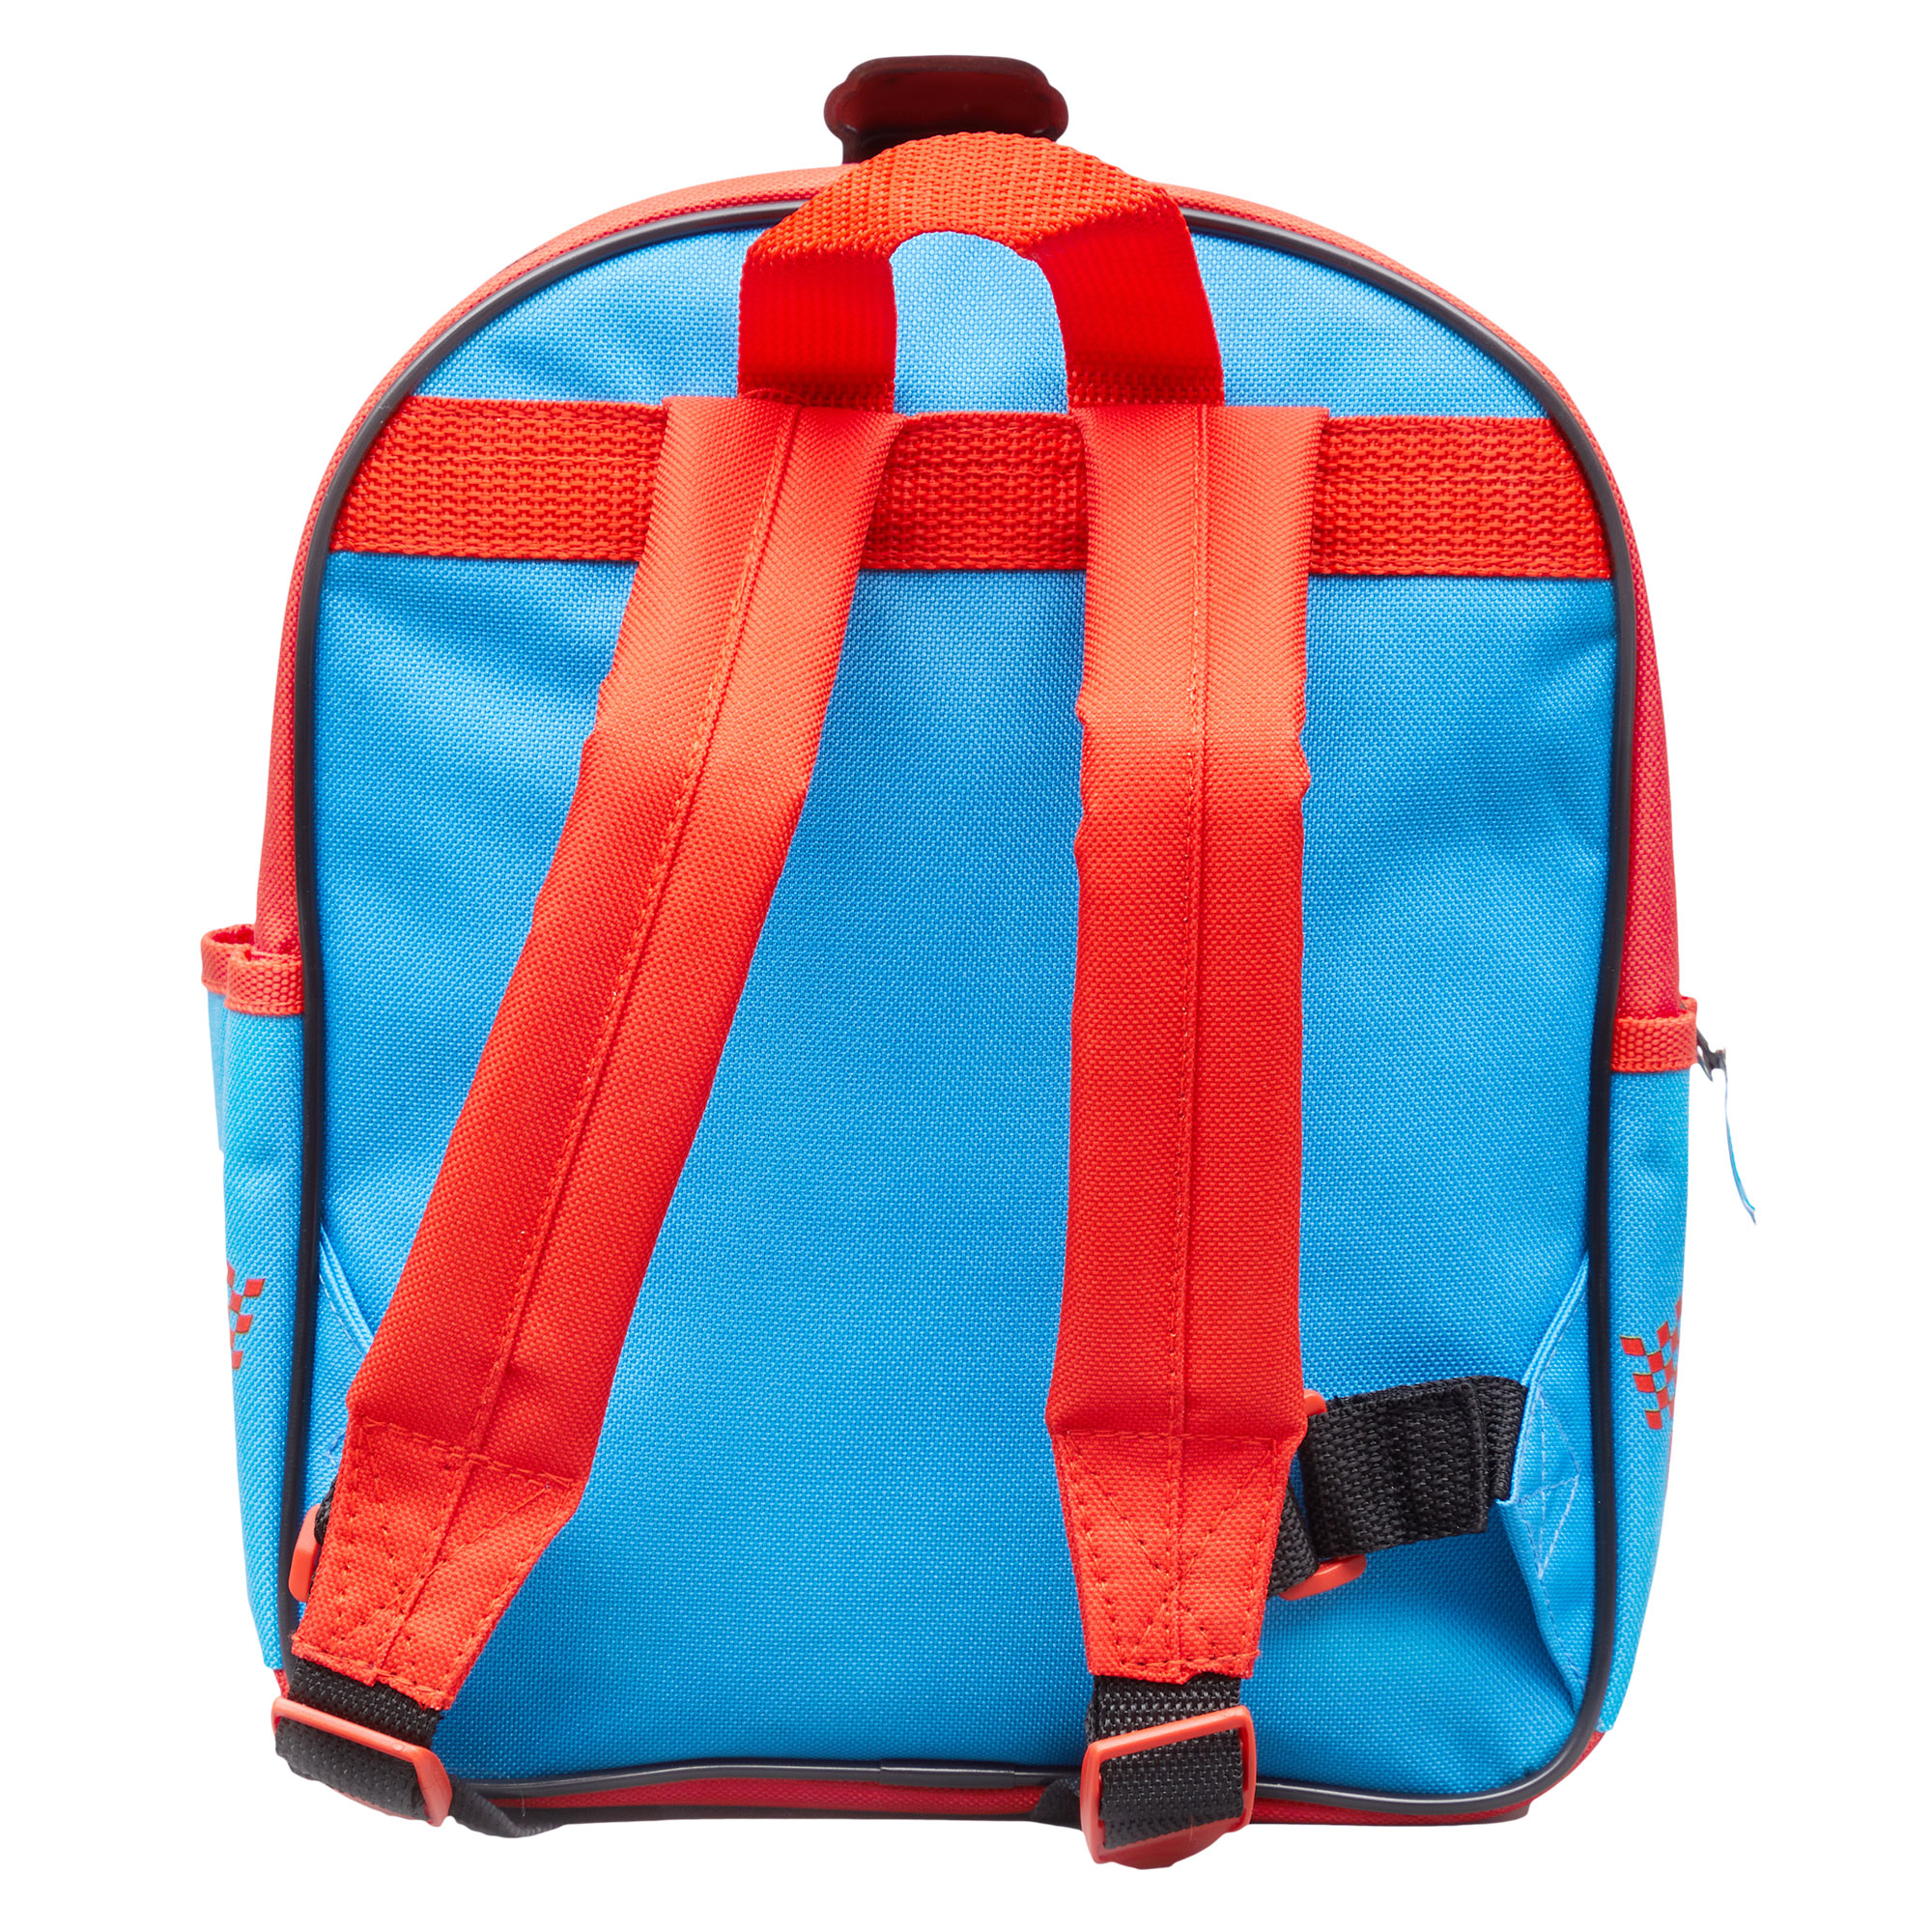 Thomas & Friends Backpack